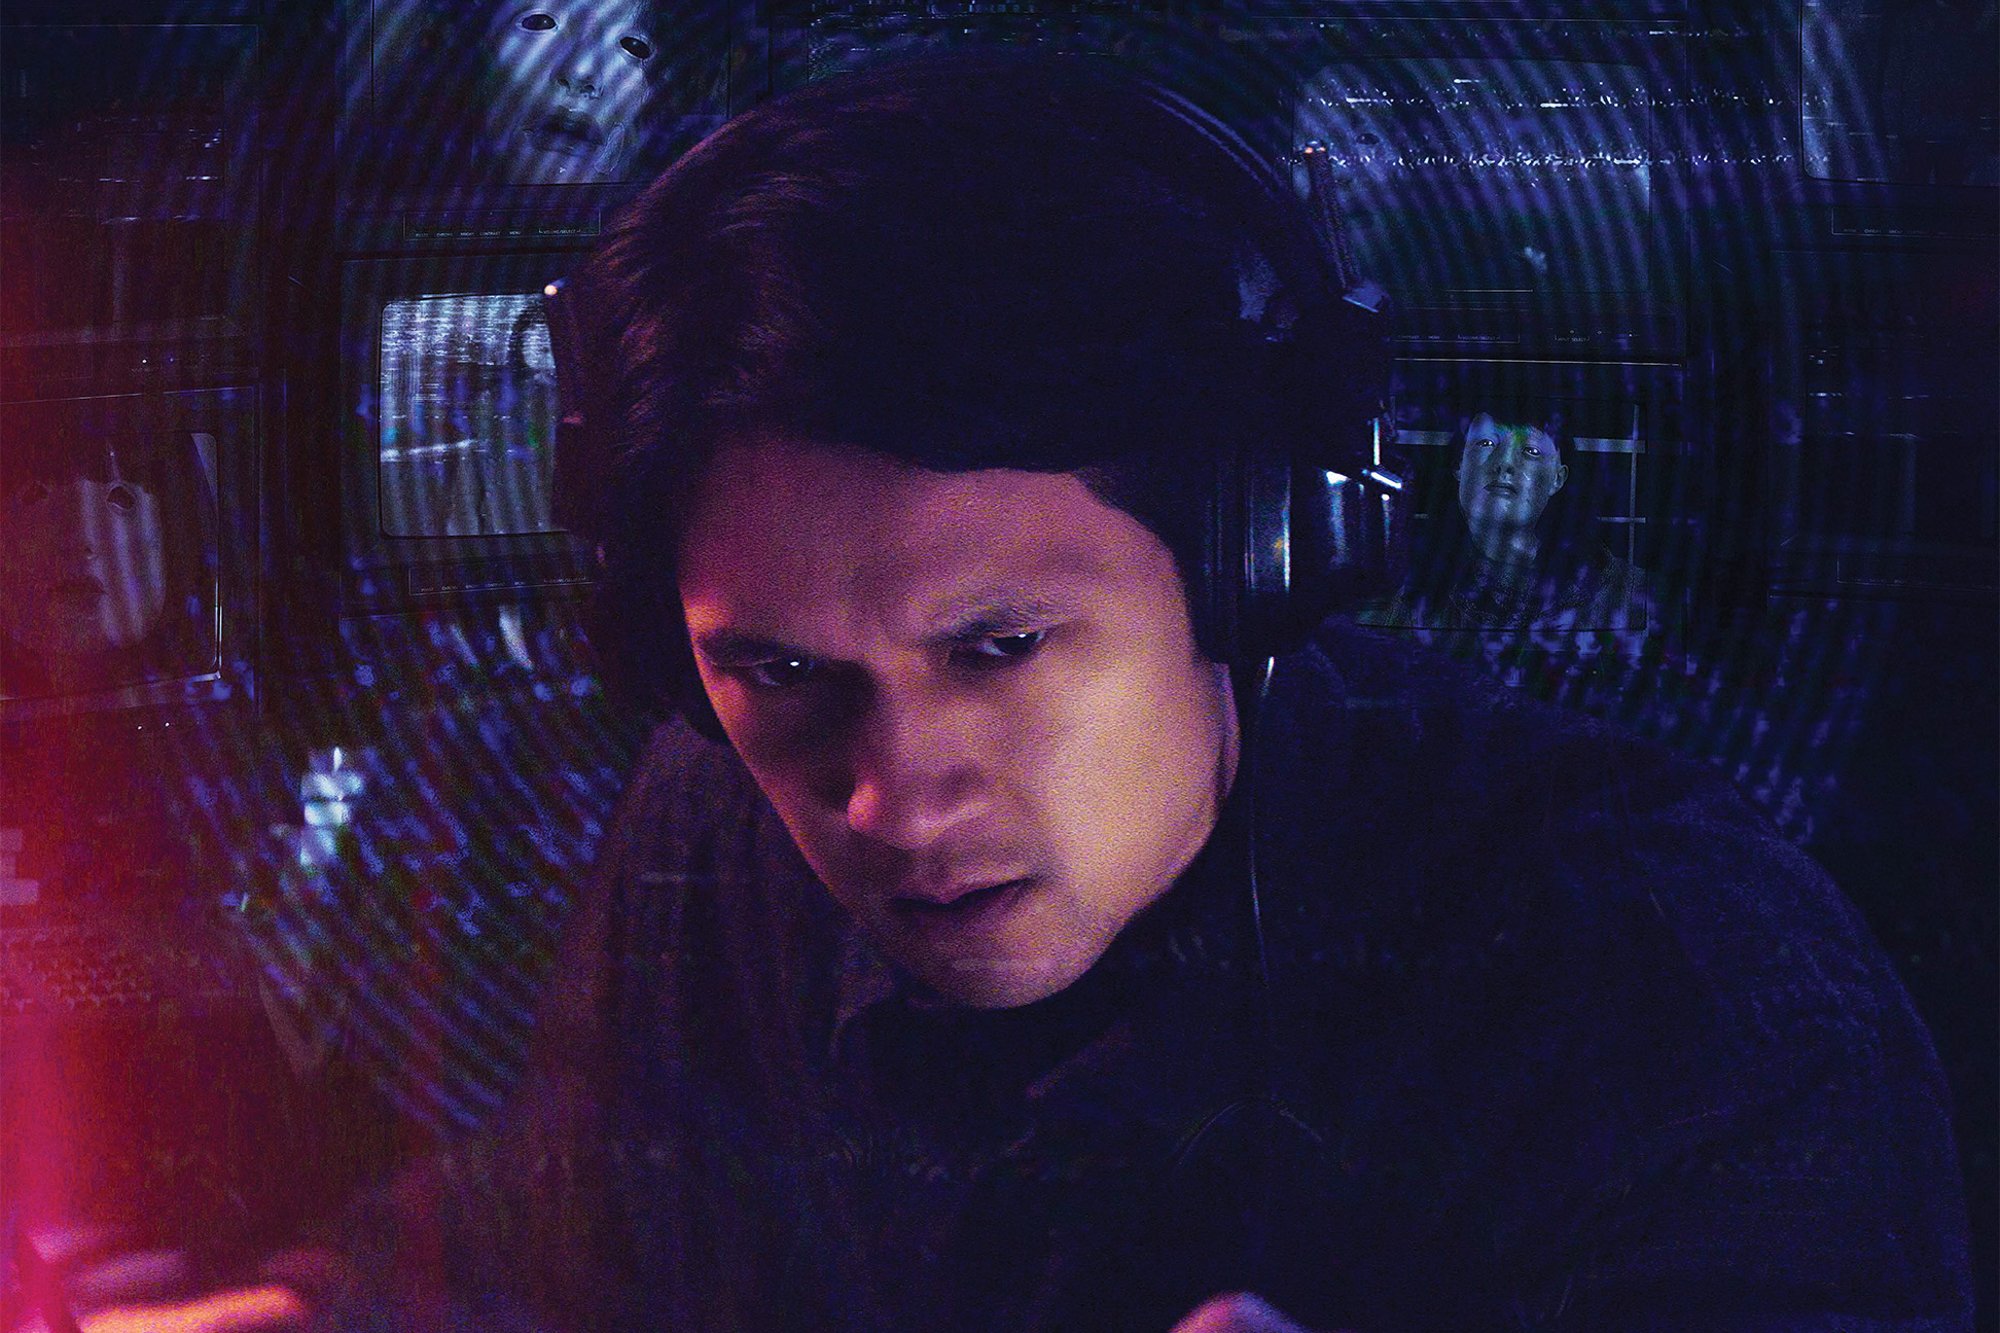 'Broadcast Signal Intrusion' actor Henry Shum Jr. with headphones on the poster